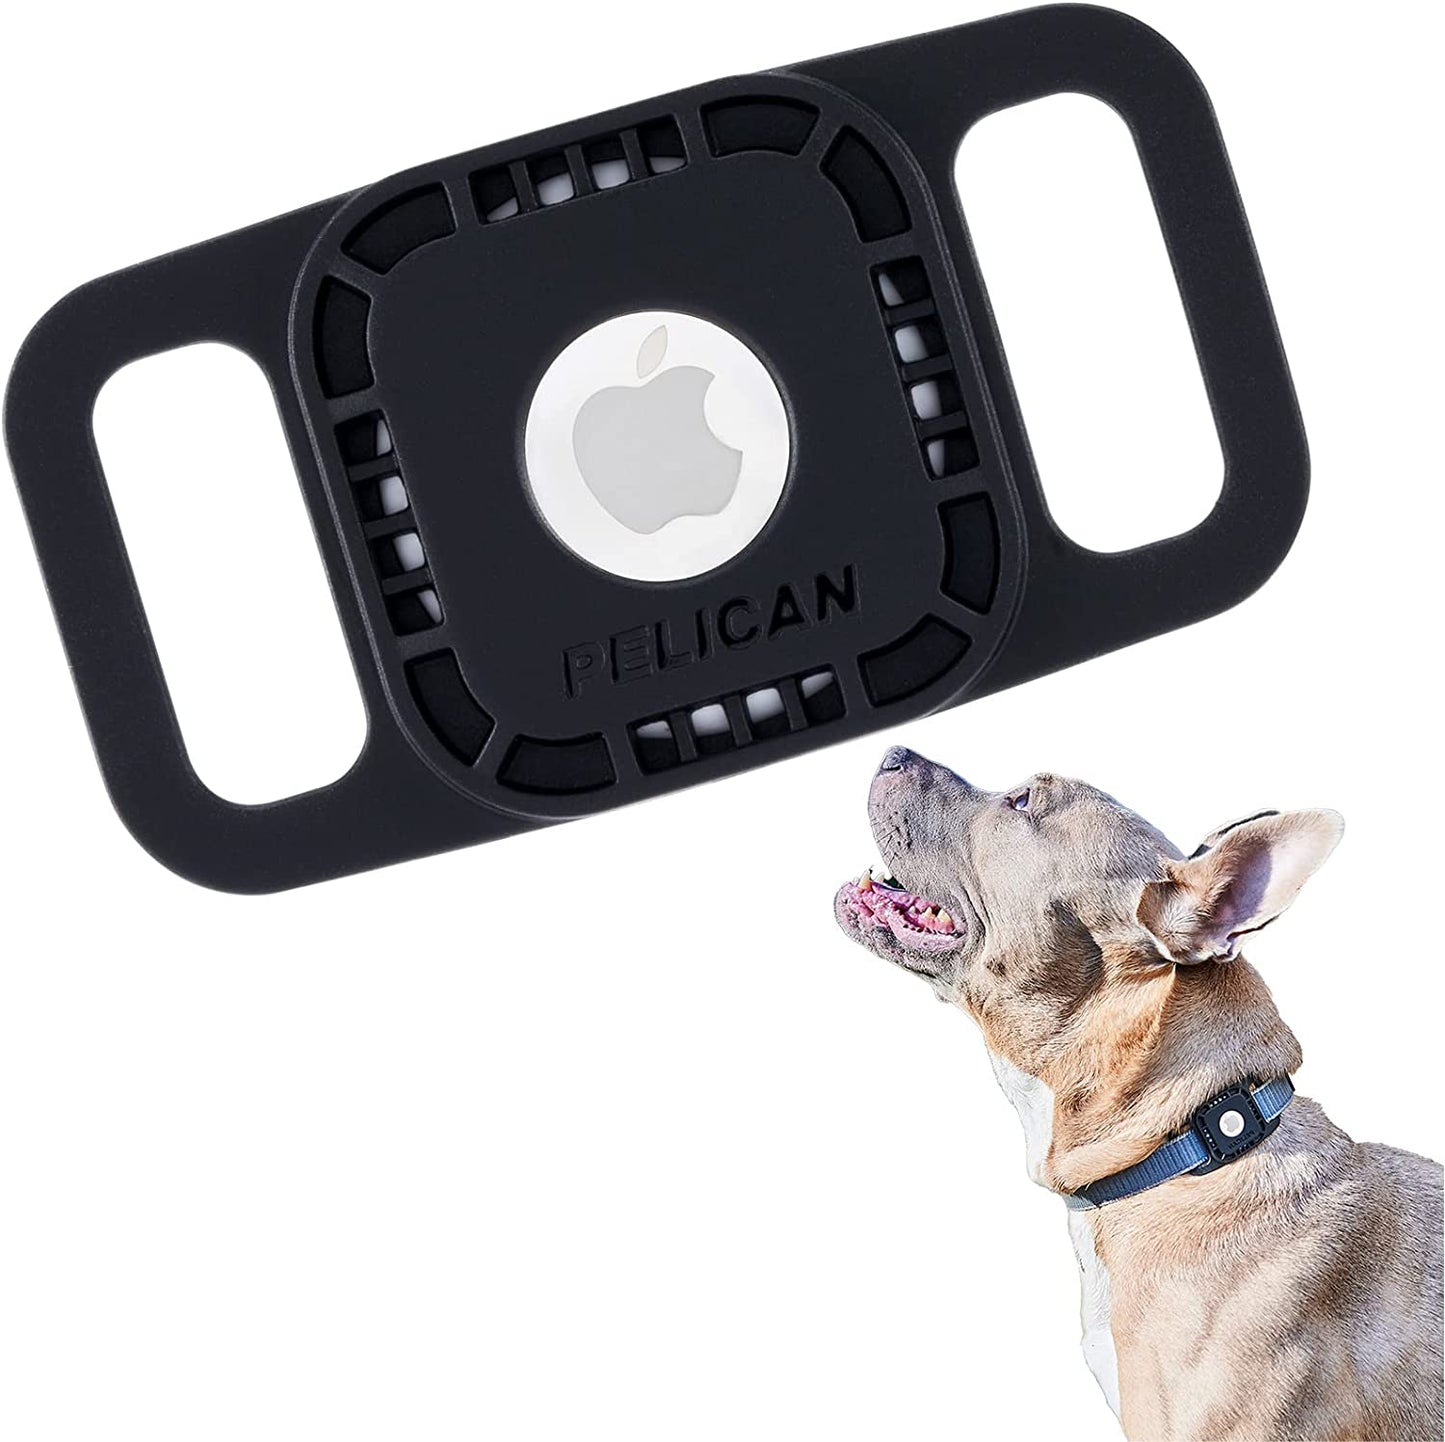 Case-Mate Protective Airtag Case for Dog Collar, Anti-Lost Airtag Loop for Dog GPS Tracker, Airtag Case Compatible with Cat/Dog Collar, (Black) Electronics > GPS Accessories > GPS Cases Case-Mate Stealth Black  